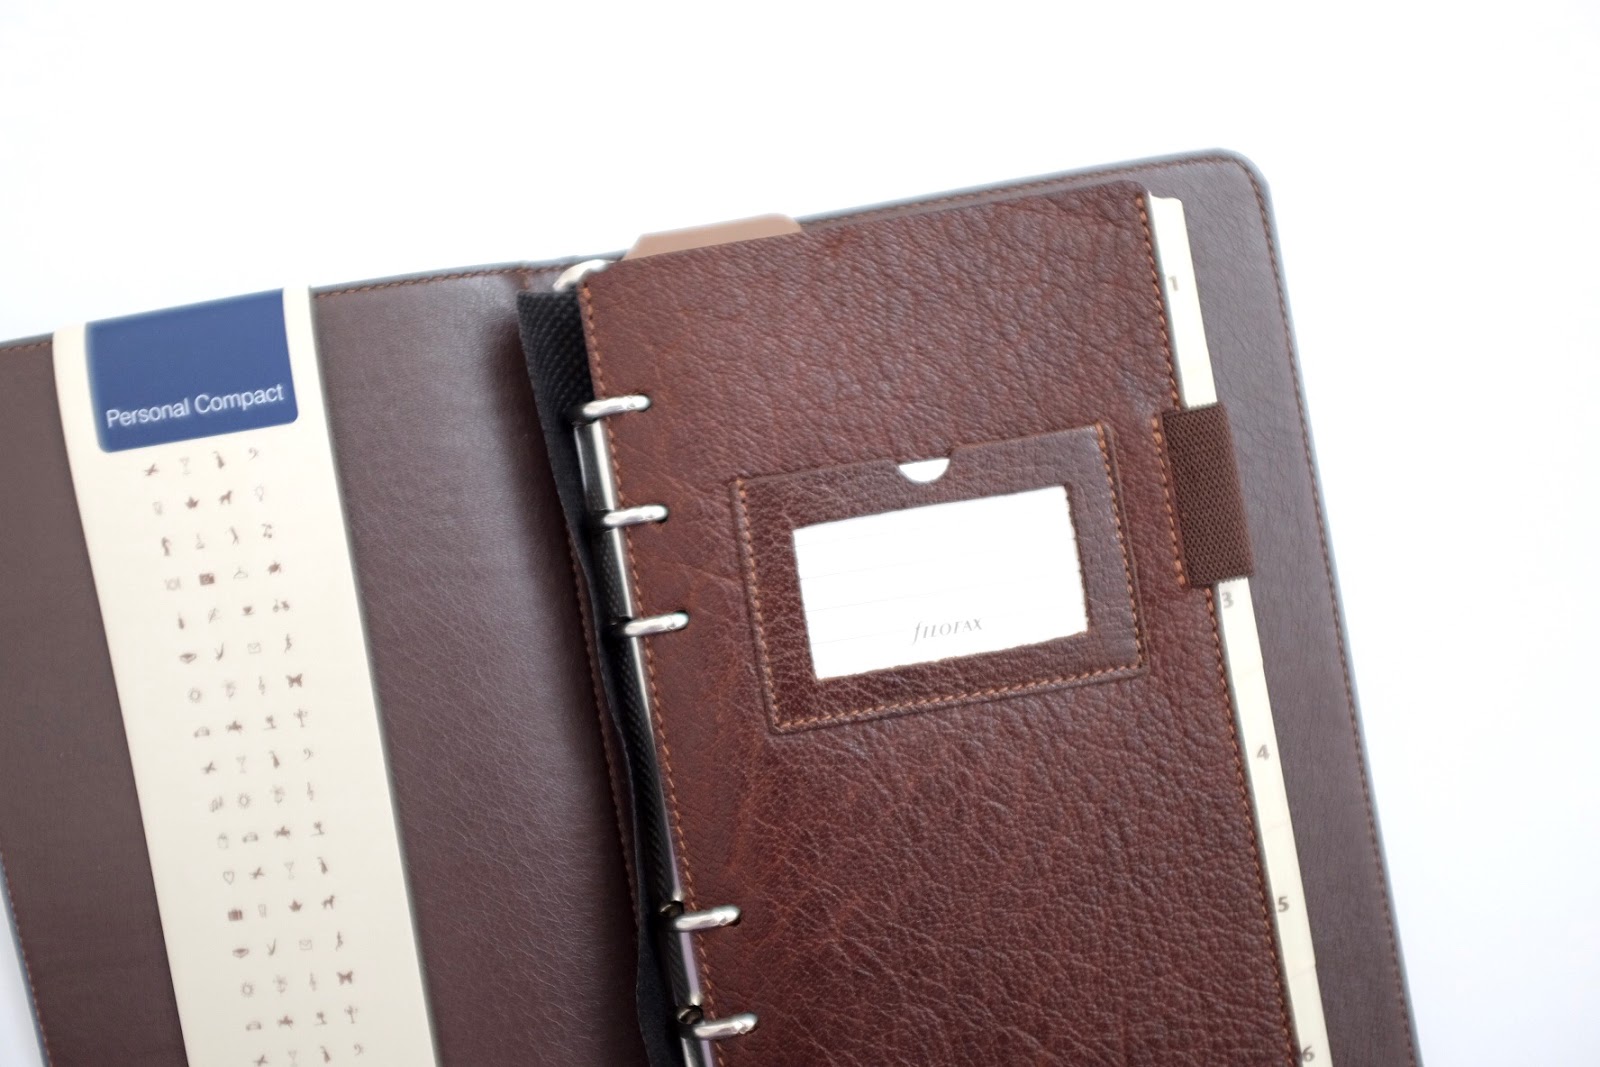 letters-in-november-filofax-personal-compact-heritage-review